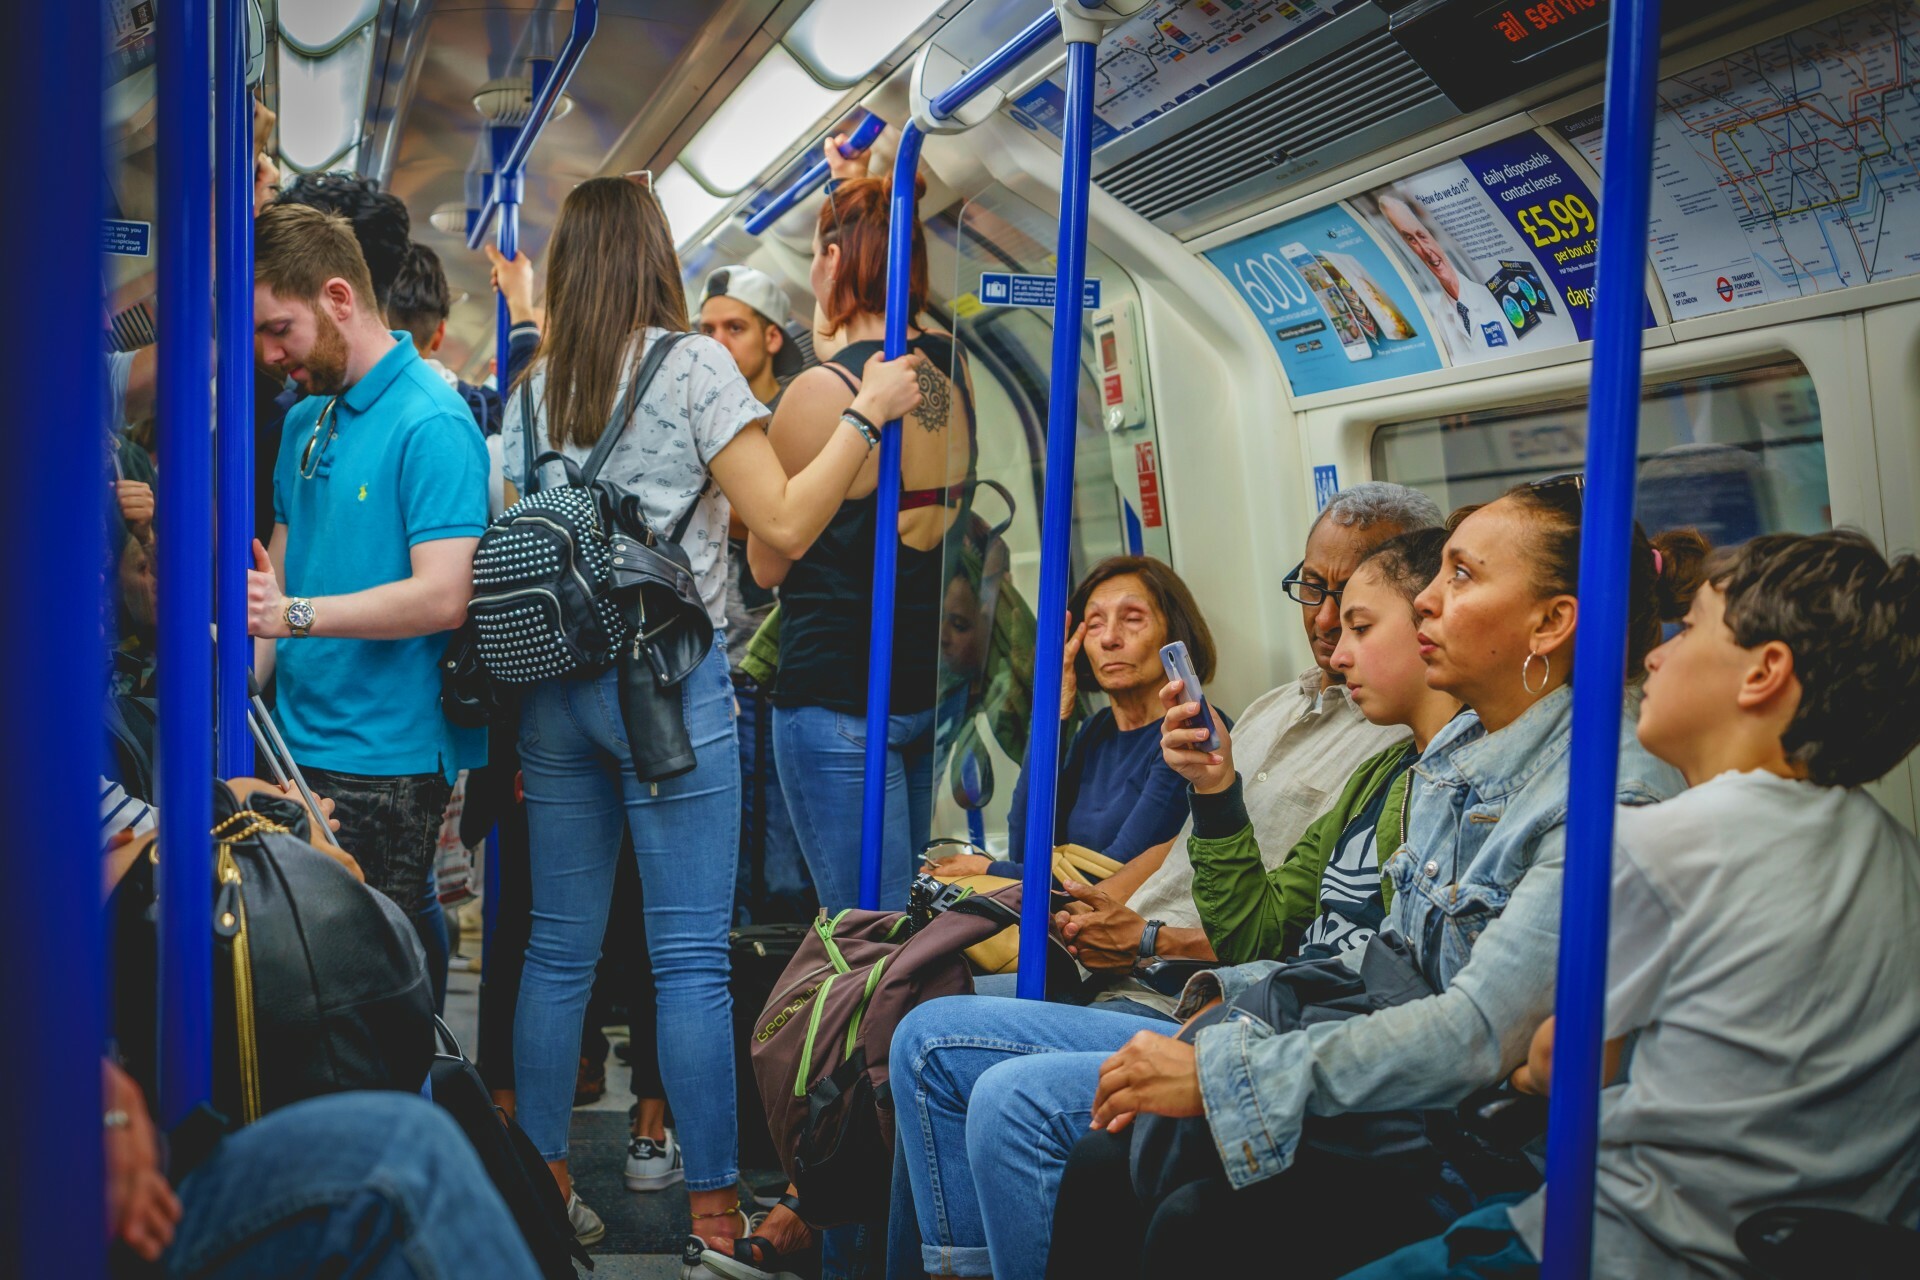 londoners-are-officially-britain’s-unhappiest-commuters